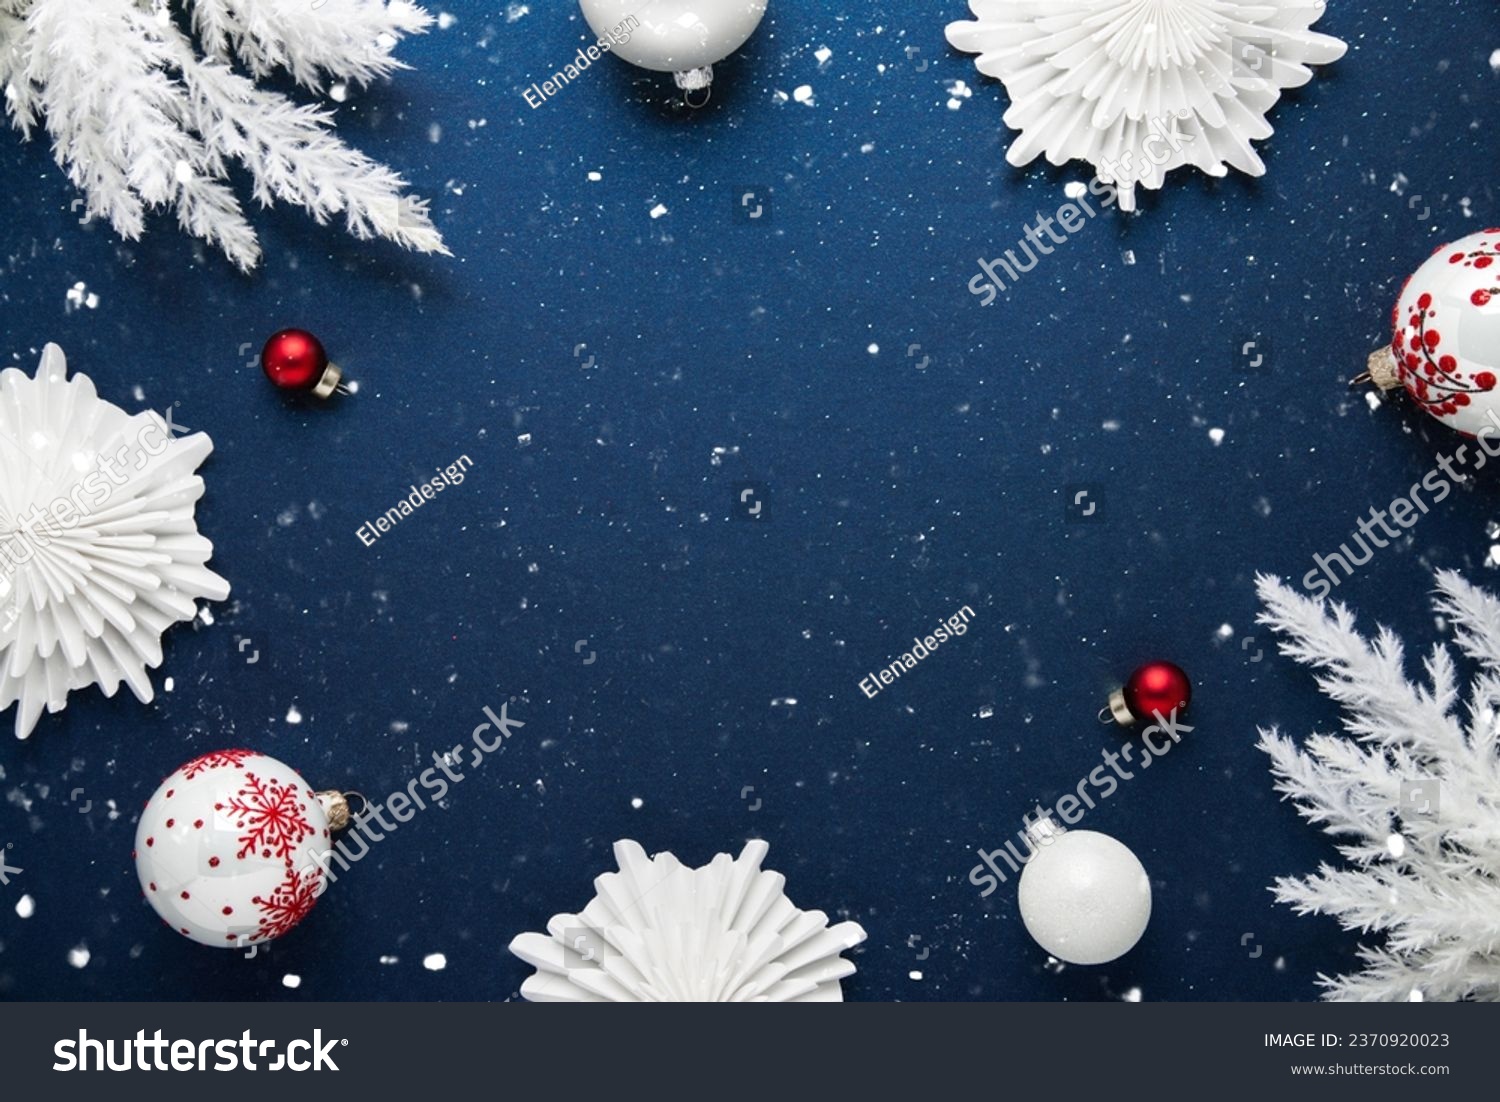 Merry Christmas and Happy Holidays greeting card, frame, banner. New Year. Noel. White Christmas white and red ornaments on blue background top view. Winter holiday xmas theme. Flat lay. #2370920023